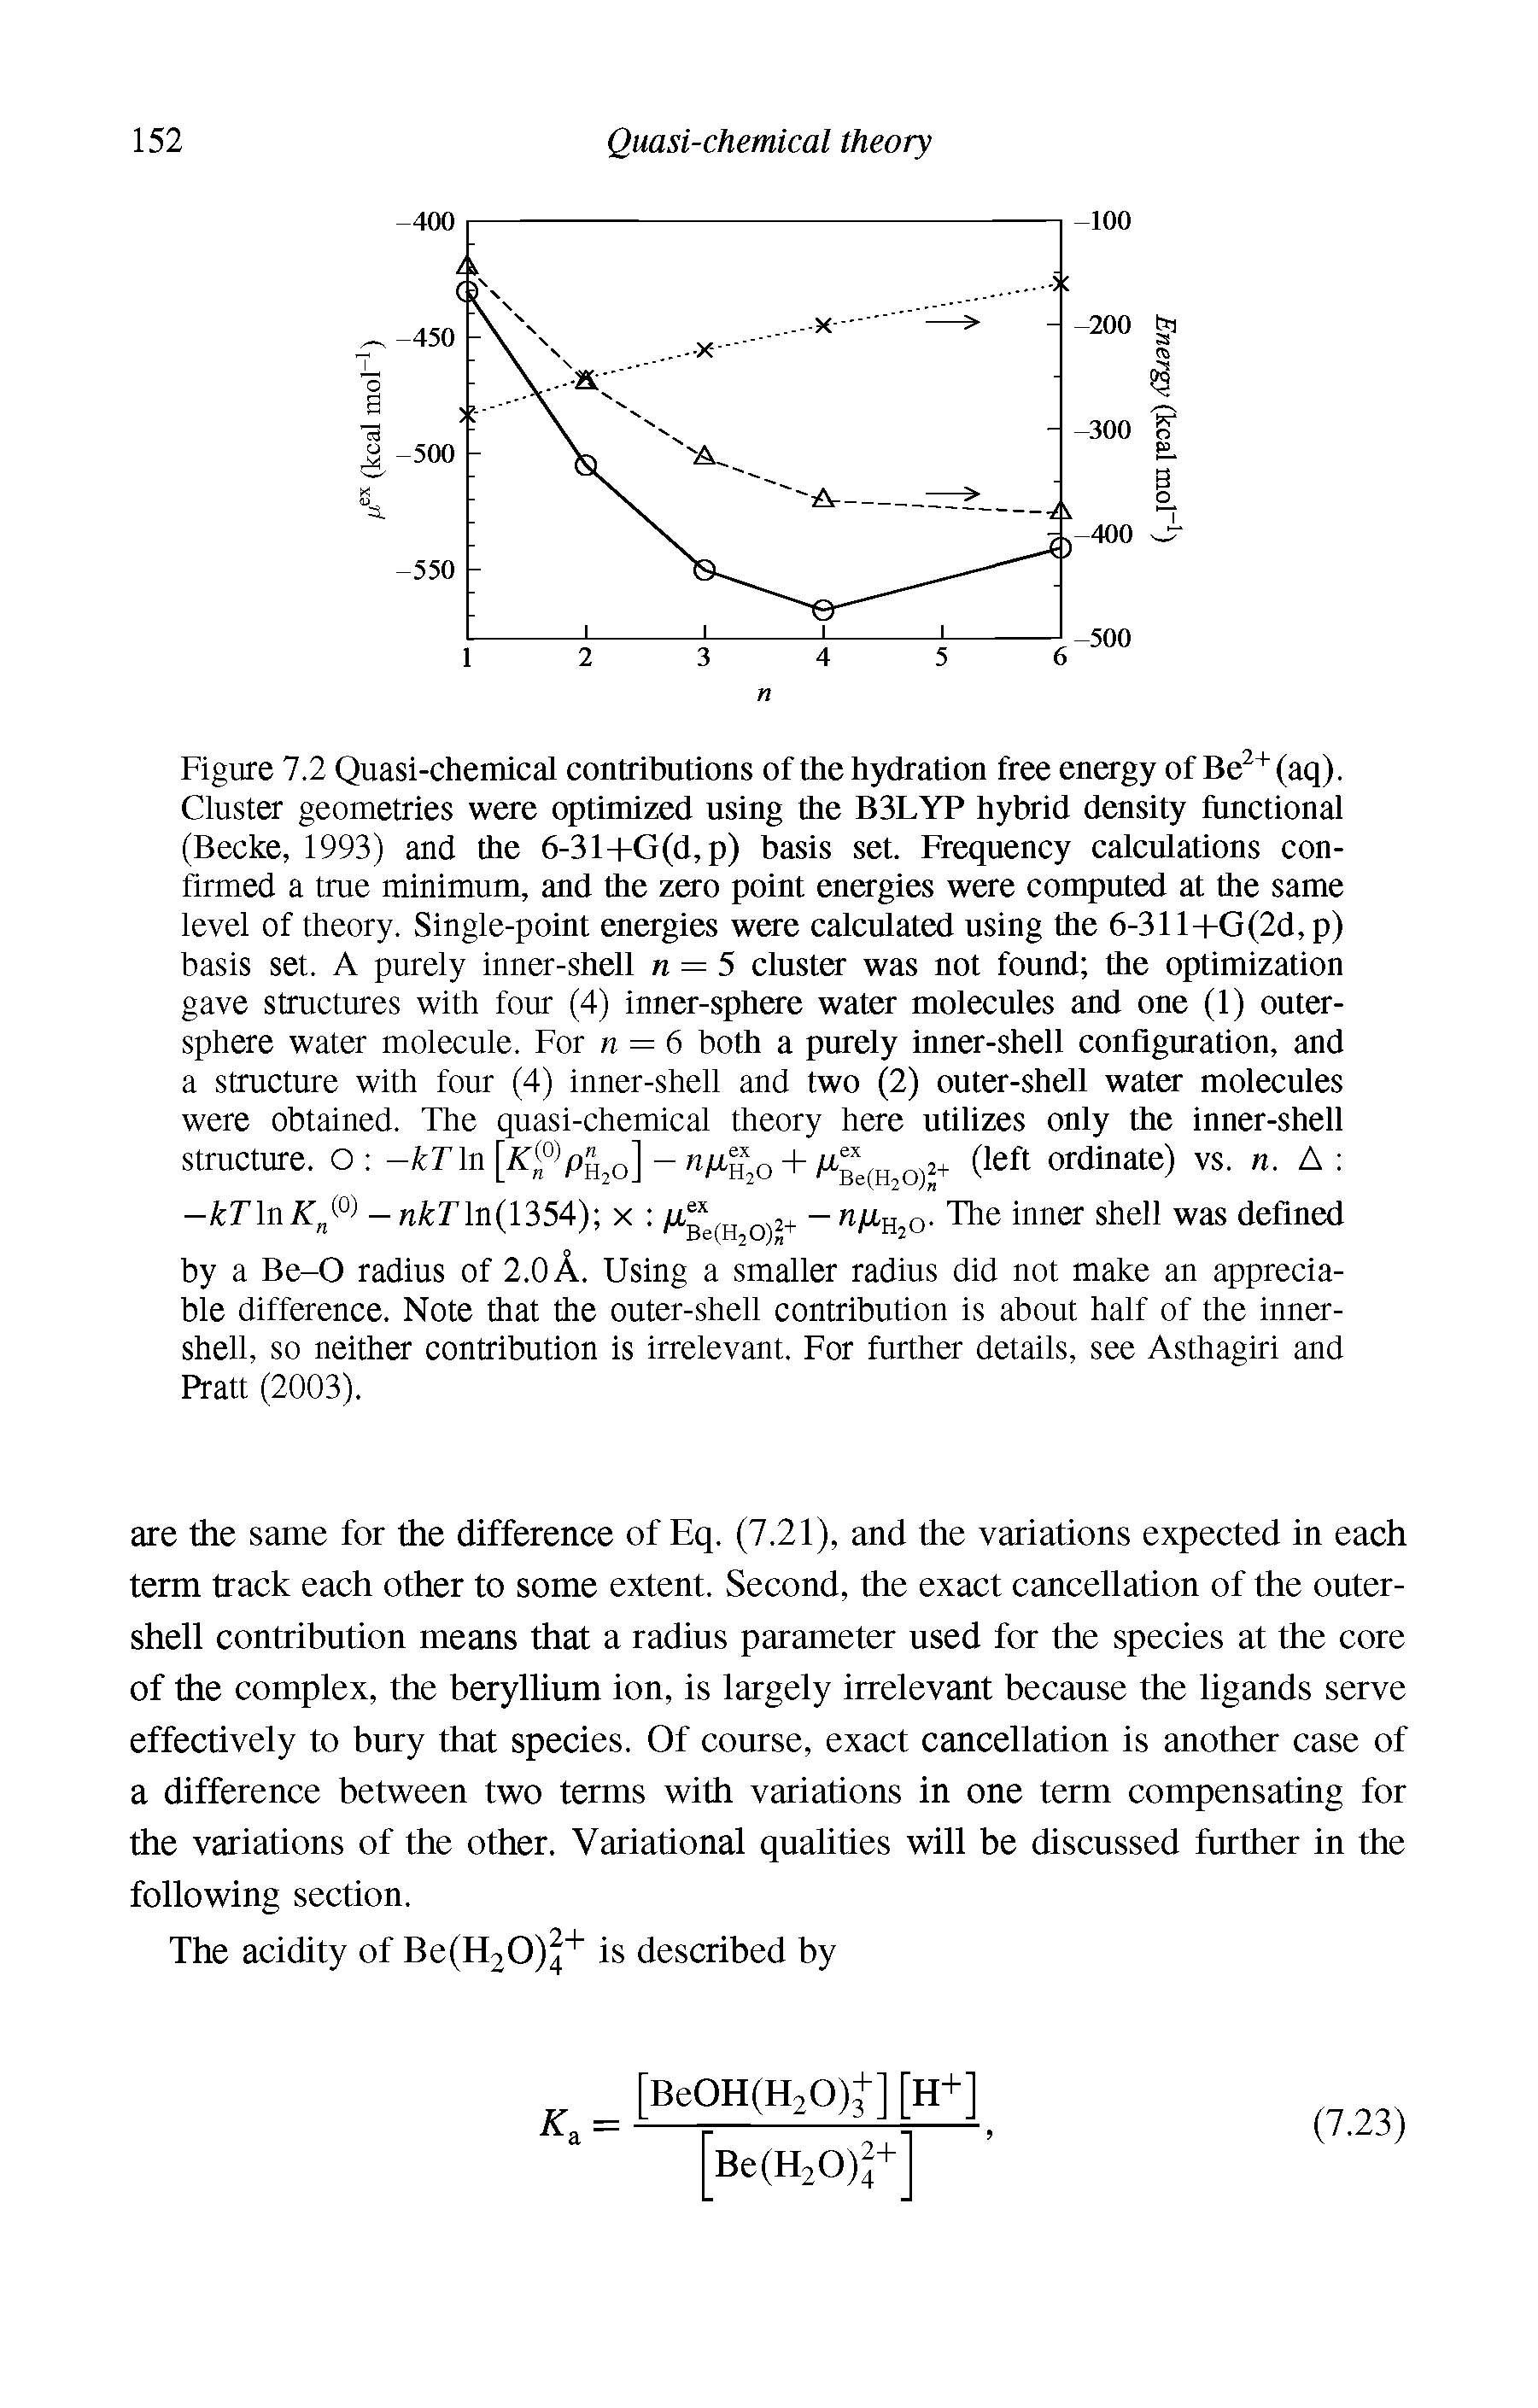 Figure 7.2 Quasi-chemical contributions of the hydration free energy of Be (aq). Cluster geometries were optimized using the B3LYP hybrid density functional (Becke, 1993) and the 6-31- -G(d, p) basis set. Frequency calculations confirmed a true minimum, and the zero point energies were computed at the same level of theory. Single-point energies were calculated using the 6-311- -G(2d, p) basis set. A purely inner-shell n = 5 cluster was not found the optimization gave structures with four (4) inner-sphere water molecules and one (1) outer-sphere water molecule. For n = 6 both a purely inner-shell configuration, and a structure with four (4) inner-shell and two (2) outer-shell water molecules were obtained. The quasi-chemical theory here utilizes only the inner-shell structure. O - rin [/ff -f (left ordinate) vs. n. A ...